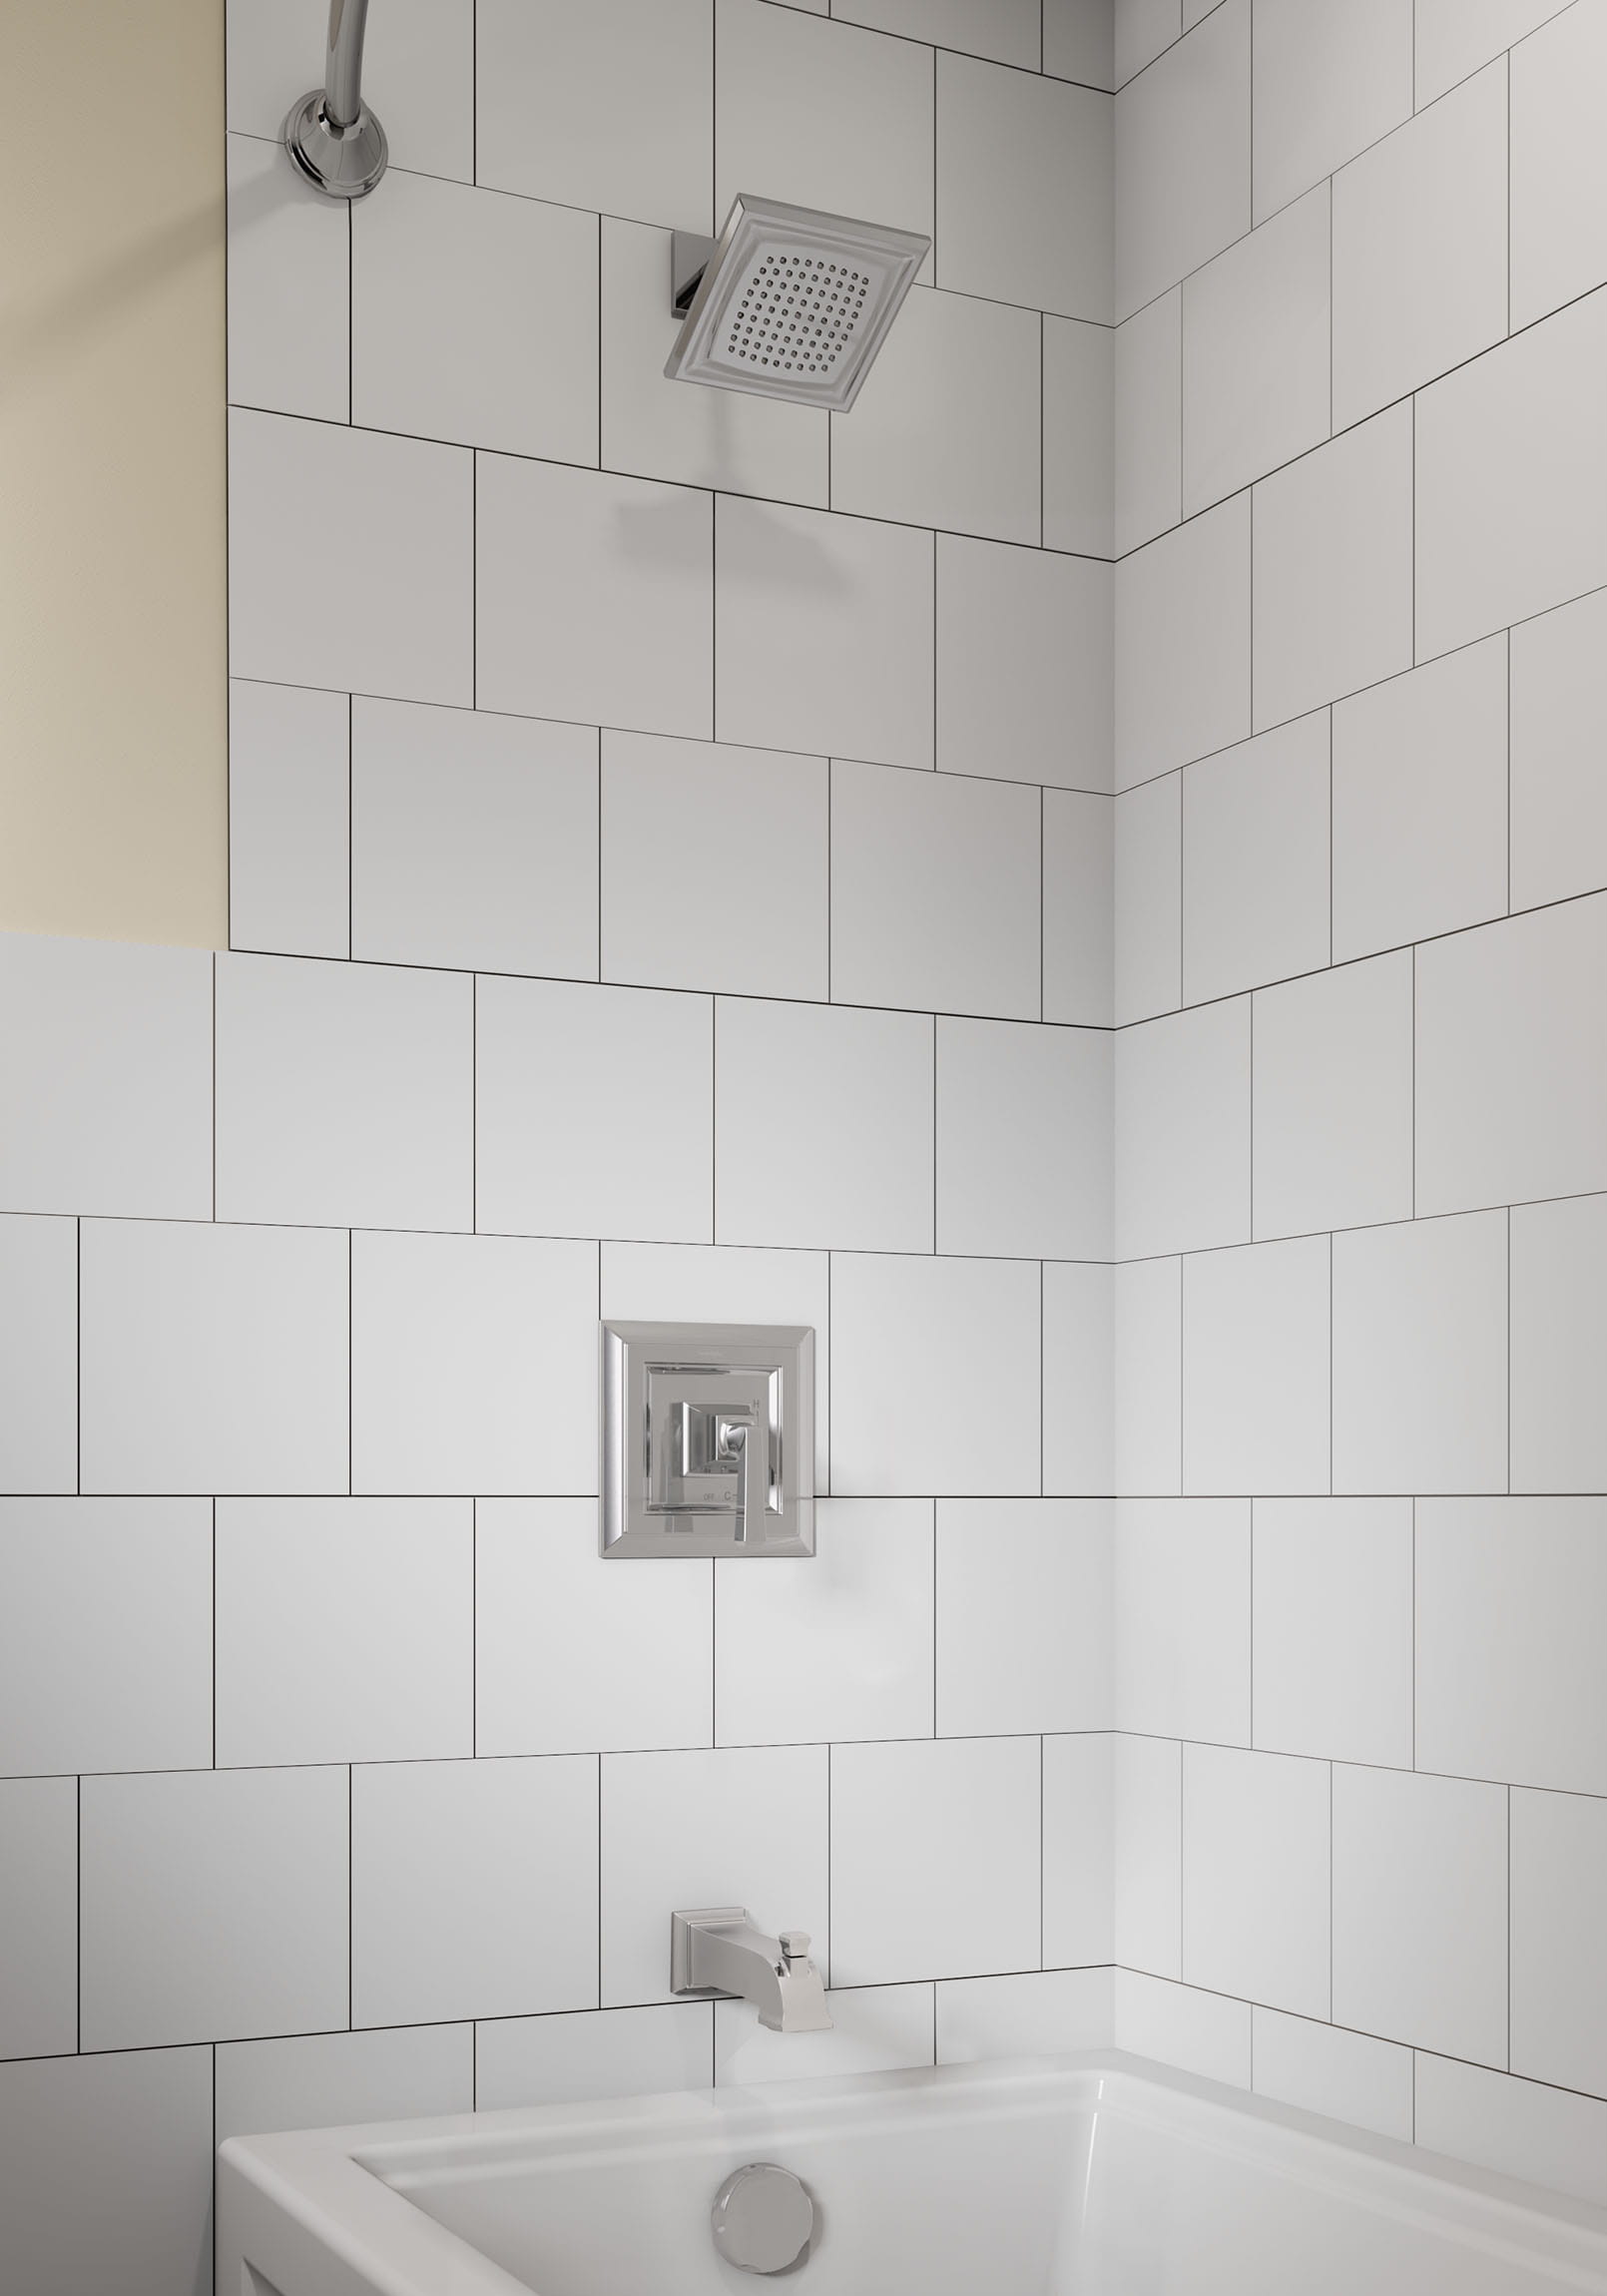 Town Square S 175 gpm 68 L min Tub and Shower Trim Kit With Water Saving Showerhead Double Ceramic Pressure Balance Cartridge With Lever Handle CHROME